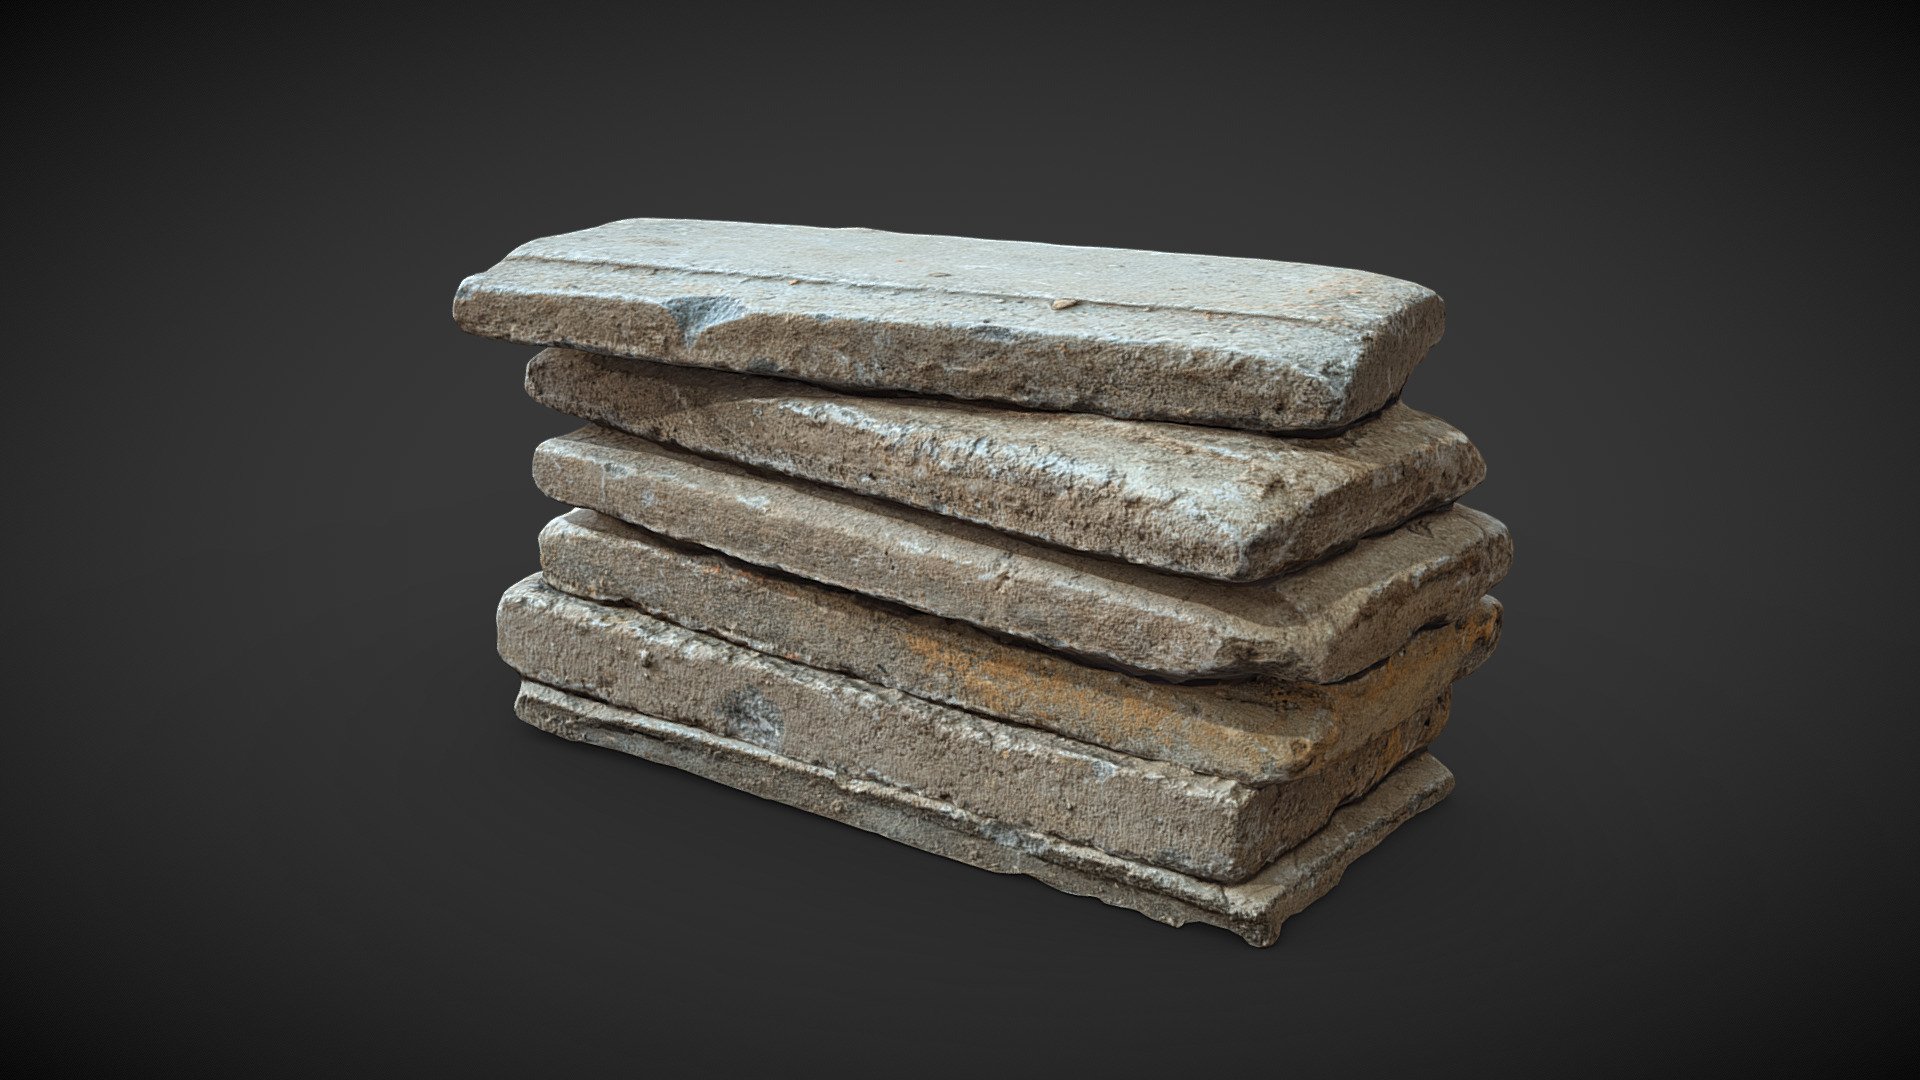 3D scan of six thin grey partially ruined bricks asymmetrically stacked on top of each other.

Reconstructed from 71 DSLR images in reality capture.

8K texture, 8k normal 3d model